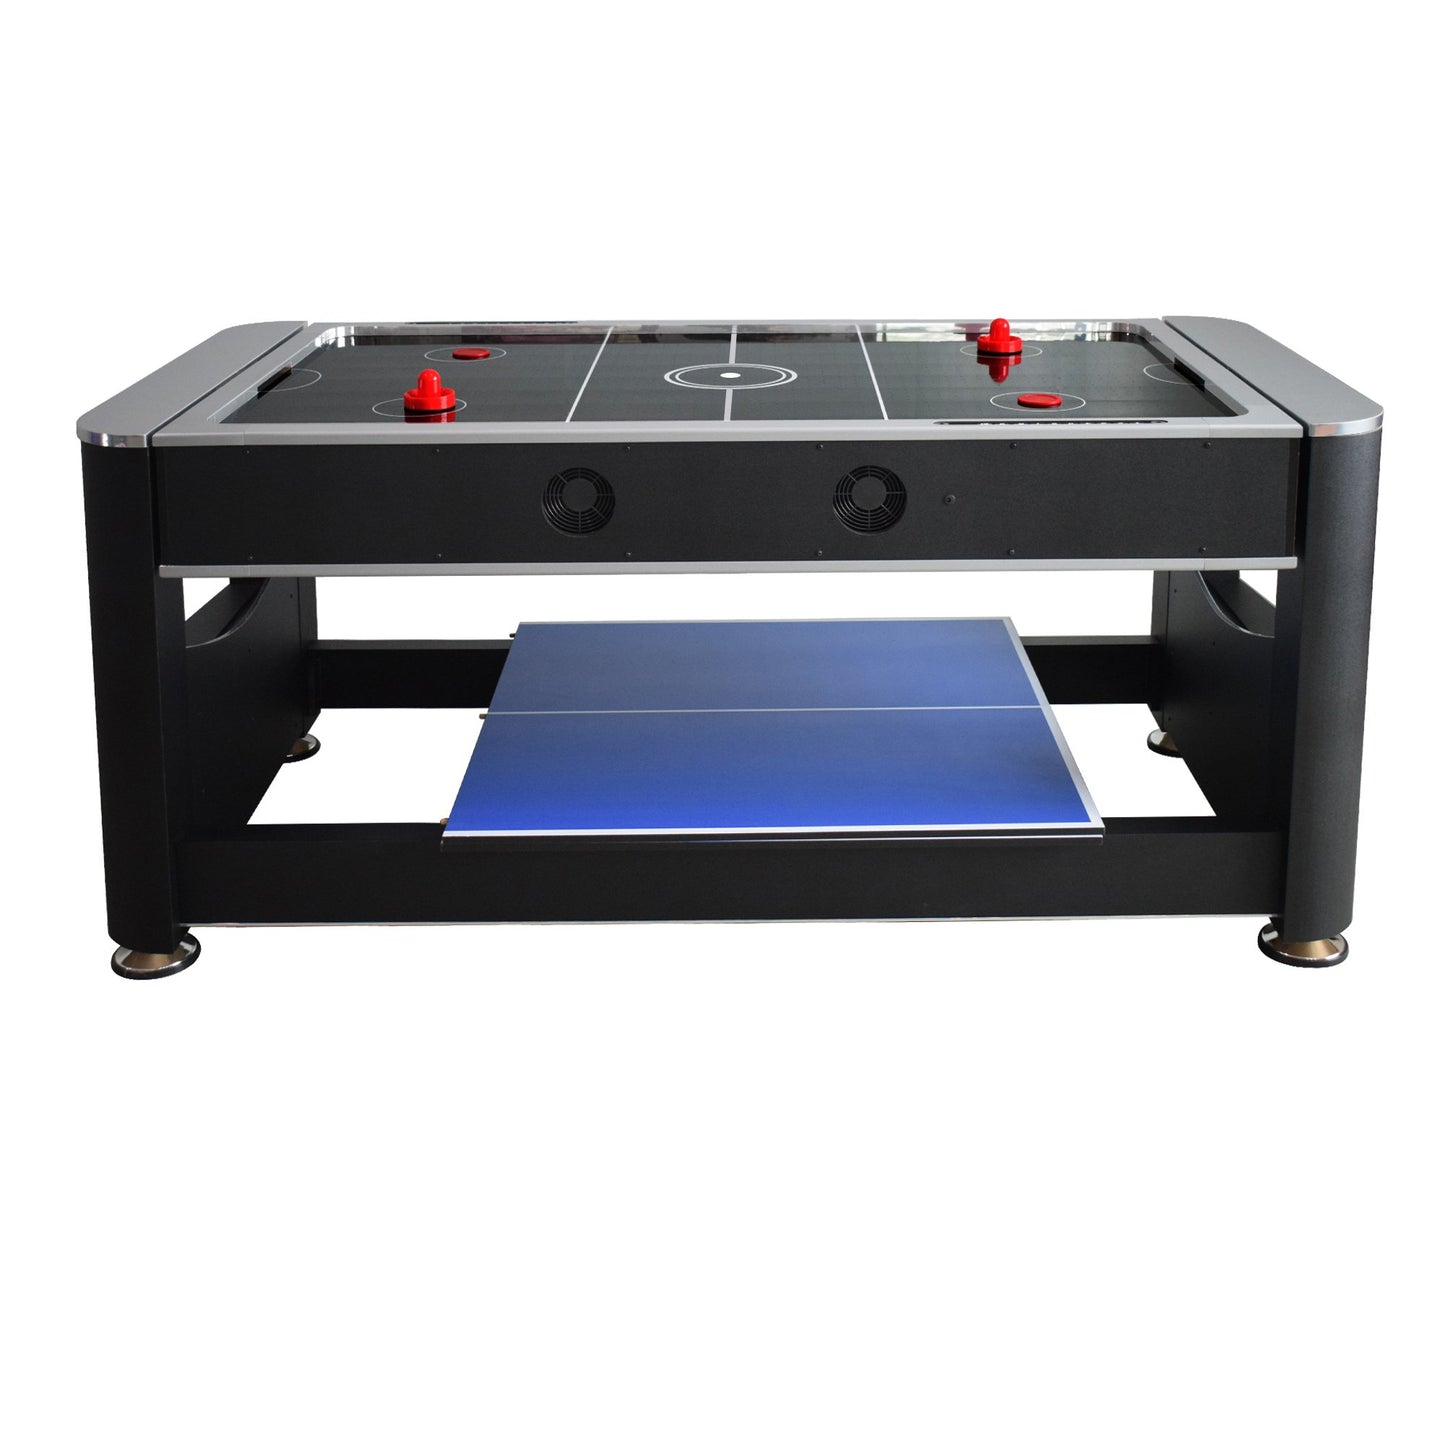 Hathaway Triple Threat 3 in 1 Multi Game Table 6ft - Gaming Blaze